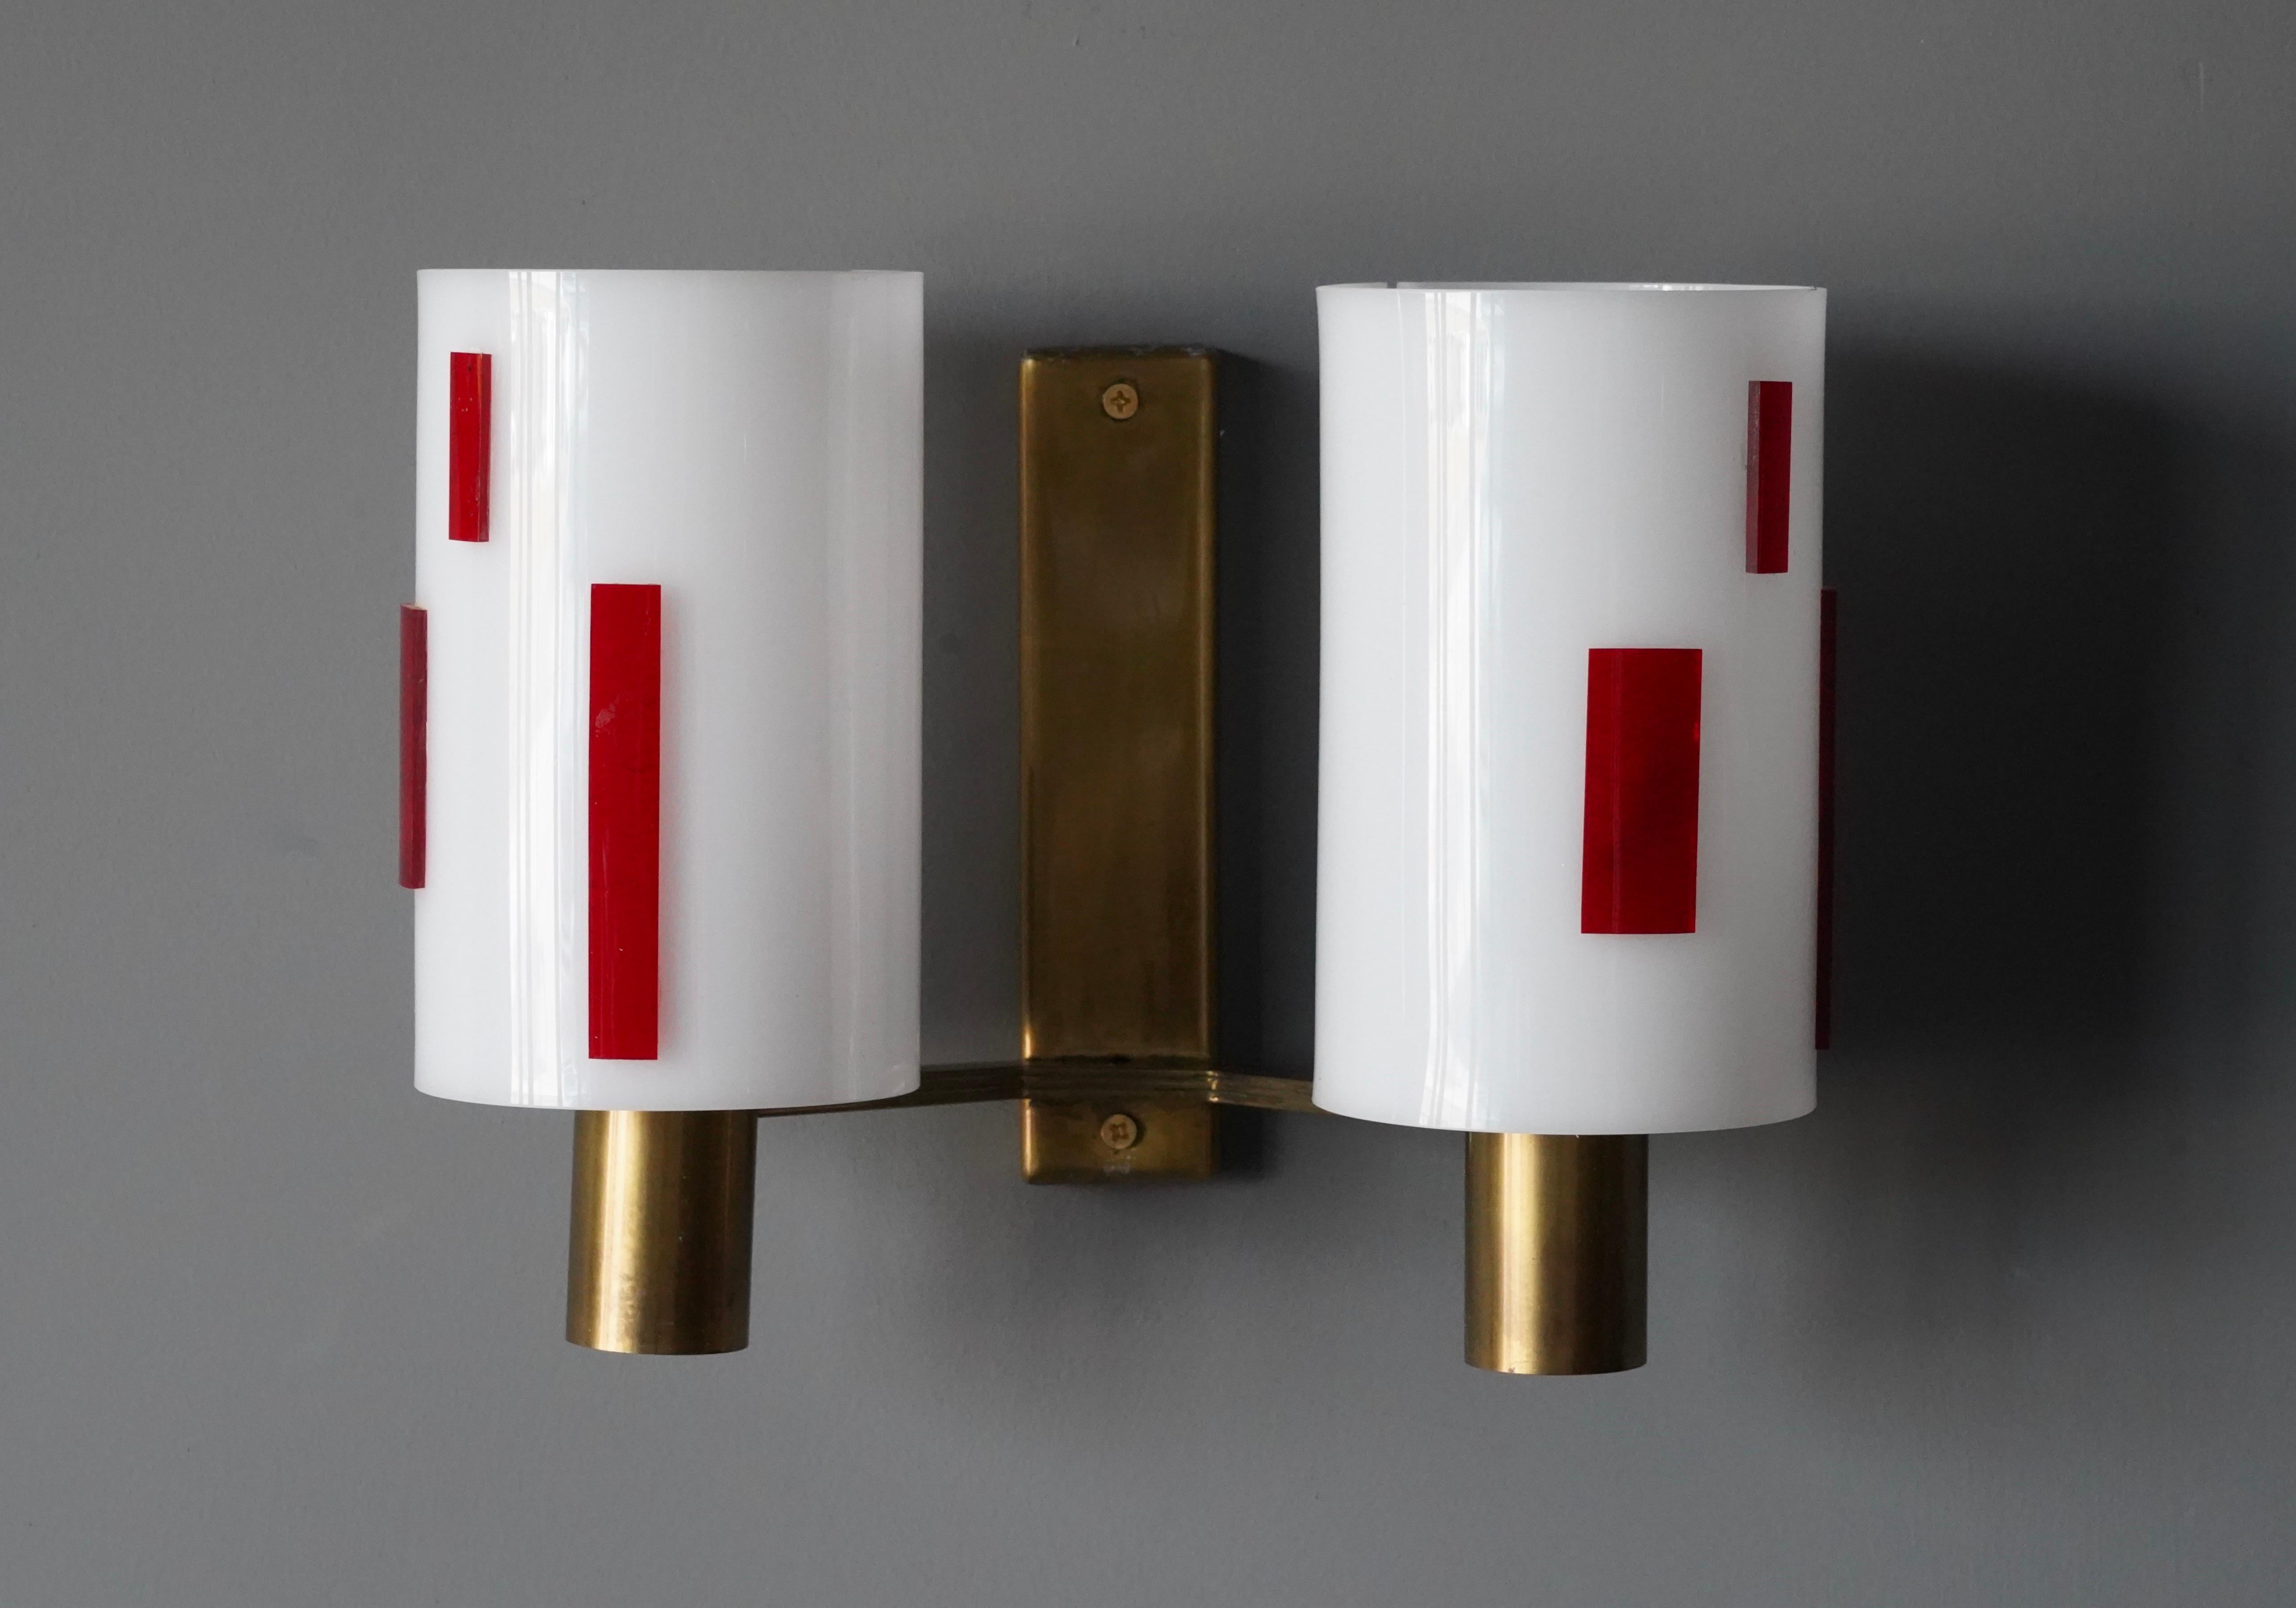 A pair of two-armed wall lights. Designed and produced in Sweden, c. 1960s. Features brass and white acrylic lampshades. With highly graphic contrastic red acrylic ornamentation.

No plug included. Hardwired only.